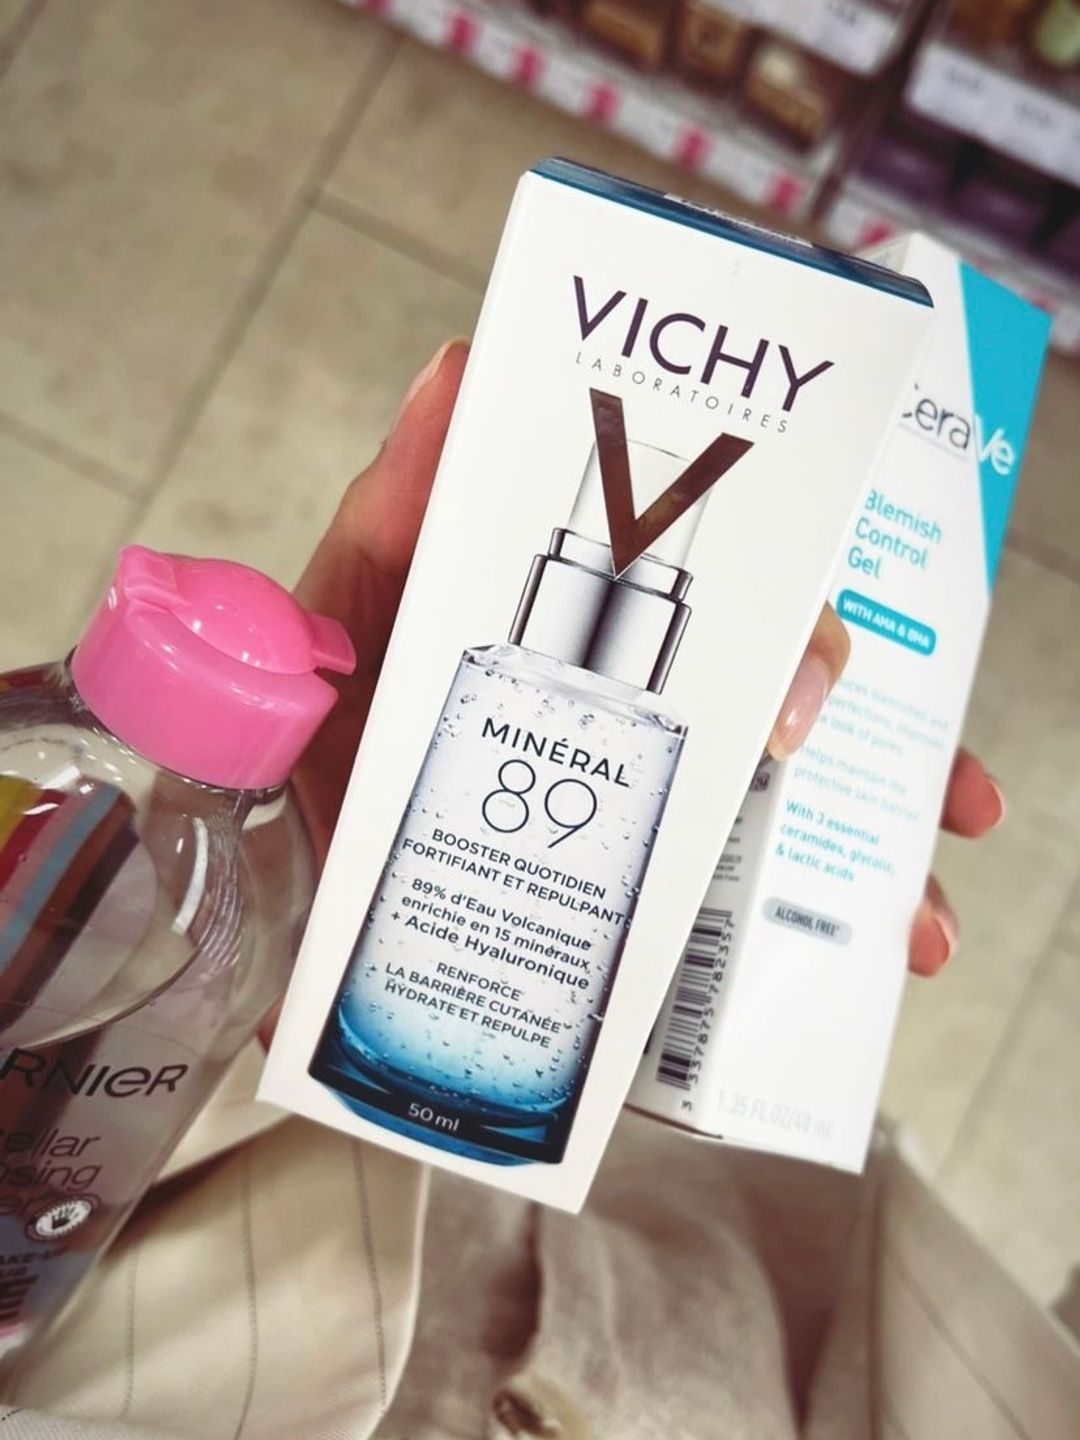 Vichy Mineral 89 serum and CeraVe Blemish Control Gel 